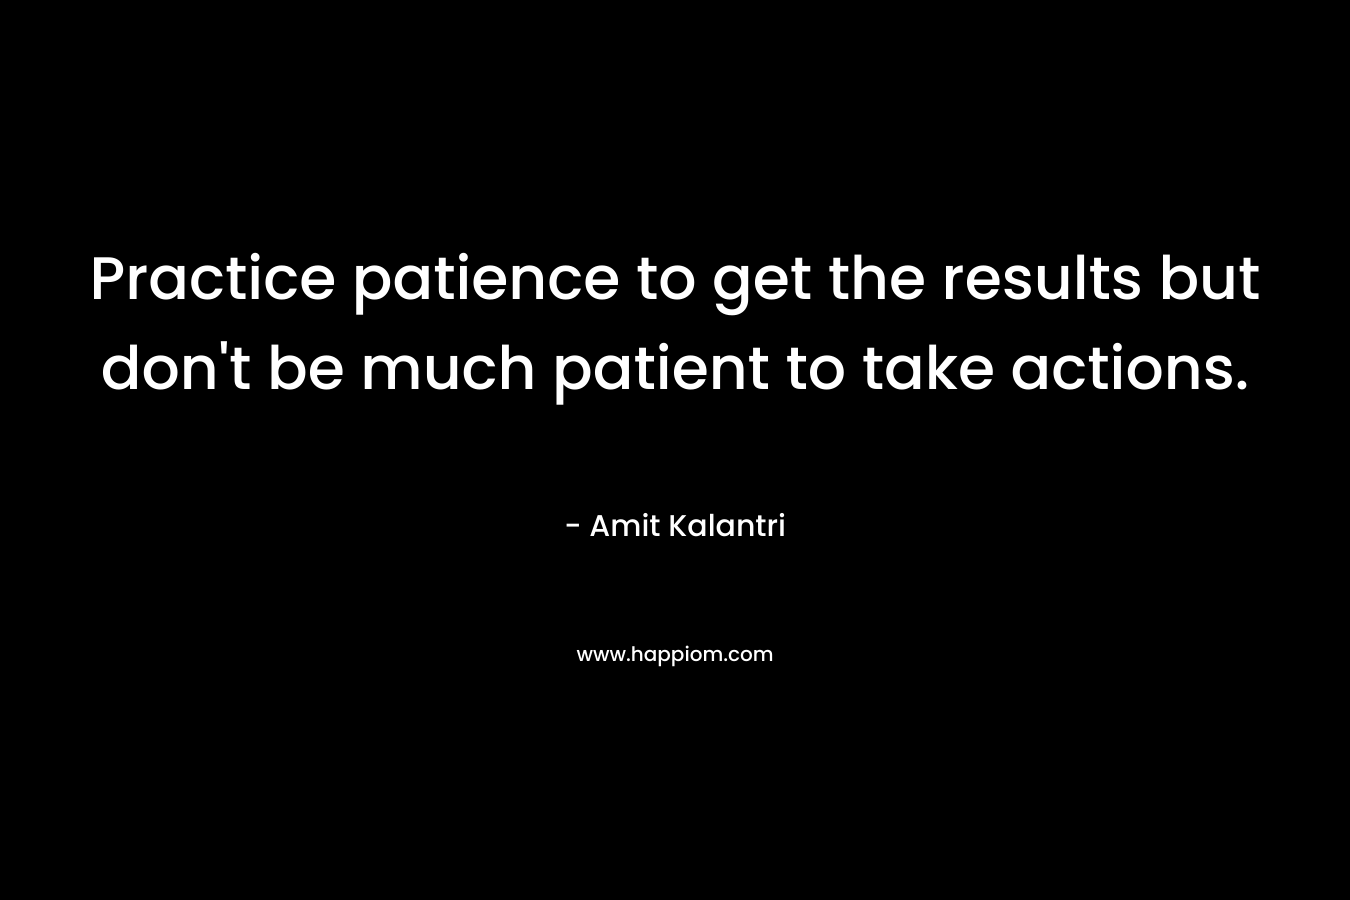 Practice patience to get the results but don't be much patient to take actions.